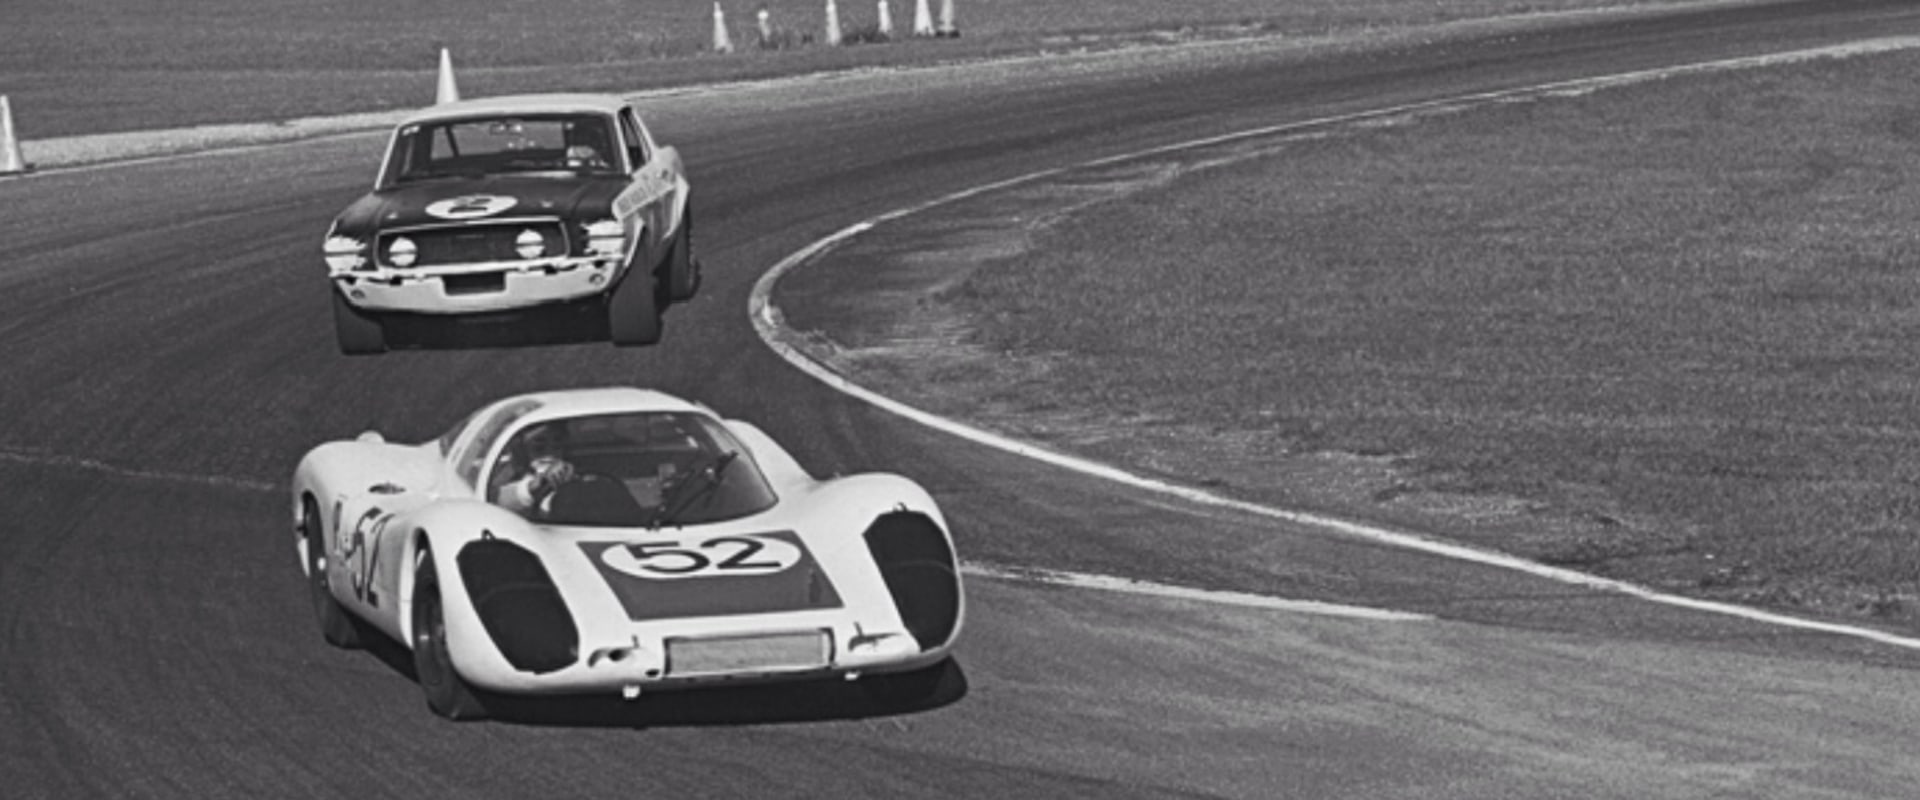 The 24 Hours of Le Mans and the 1972 Mustang Sprint Car